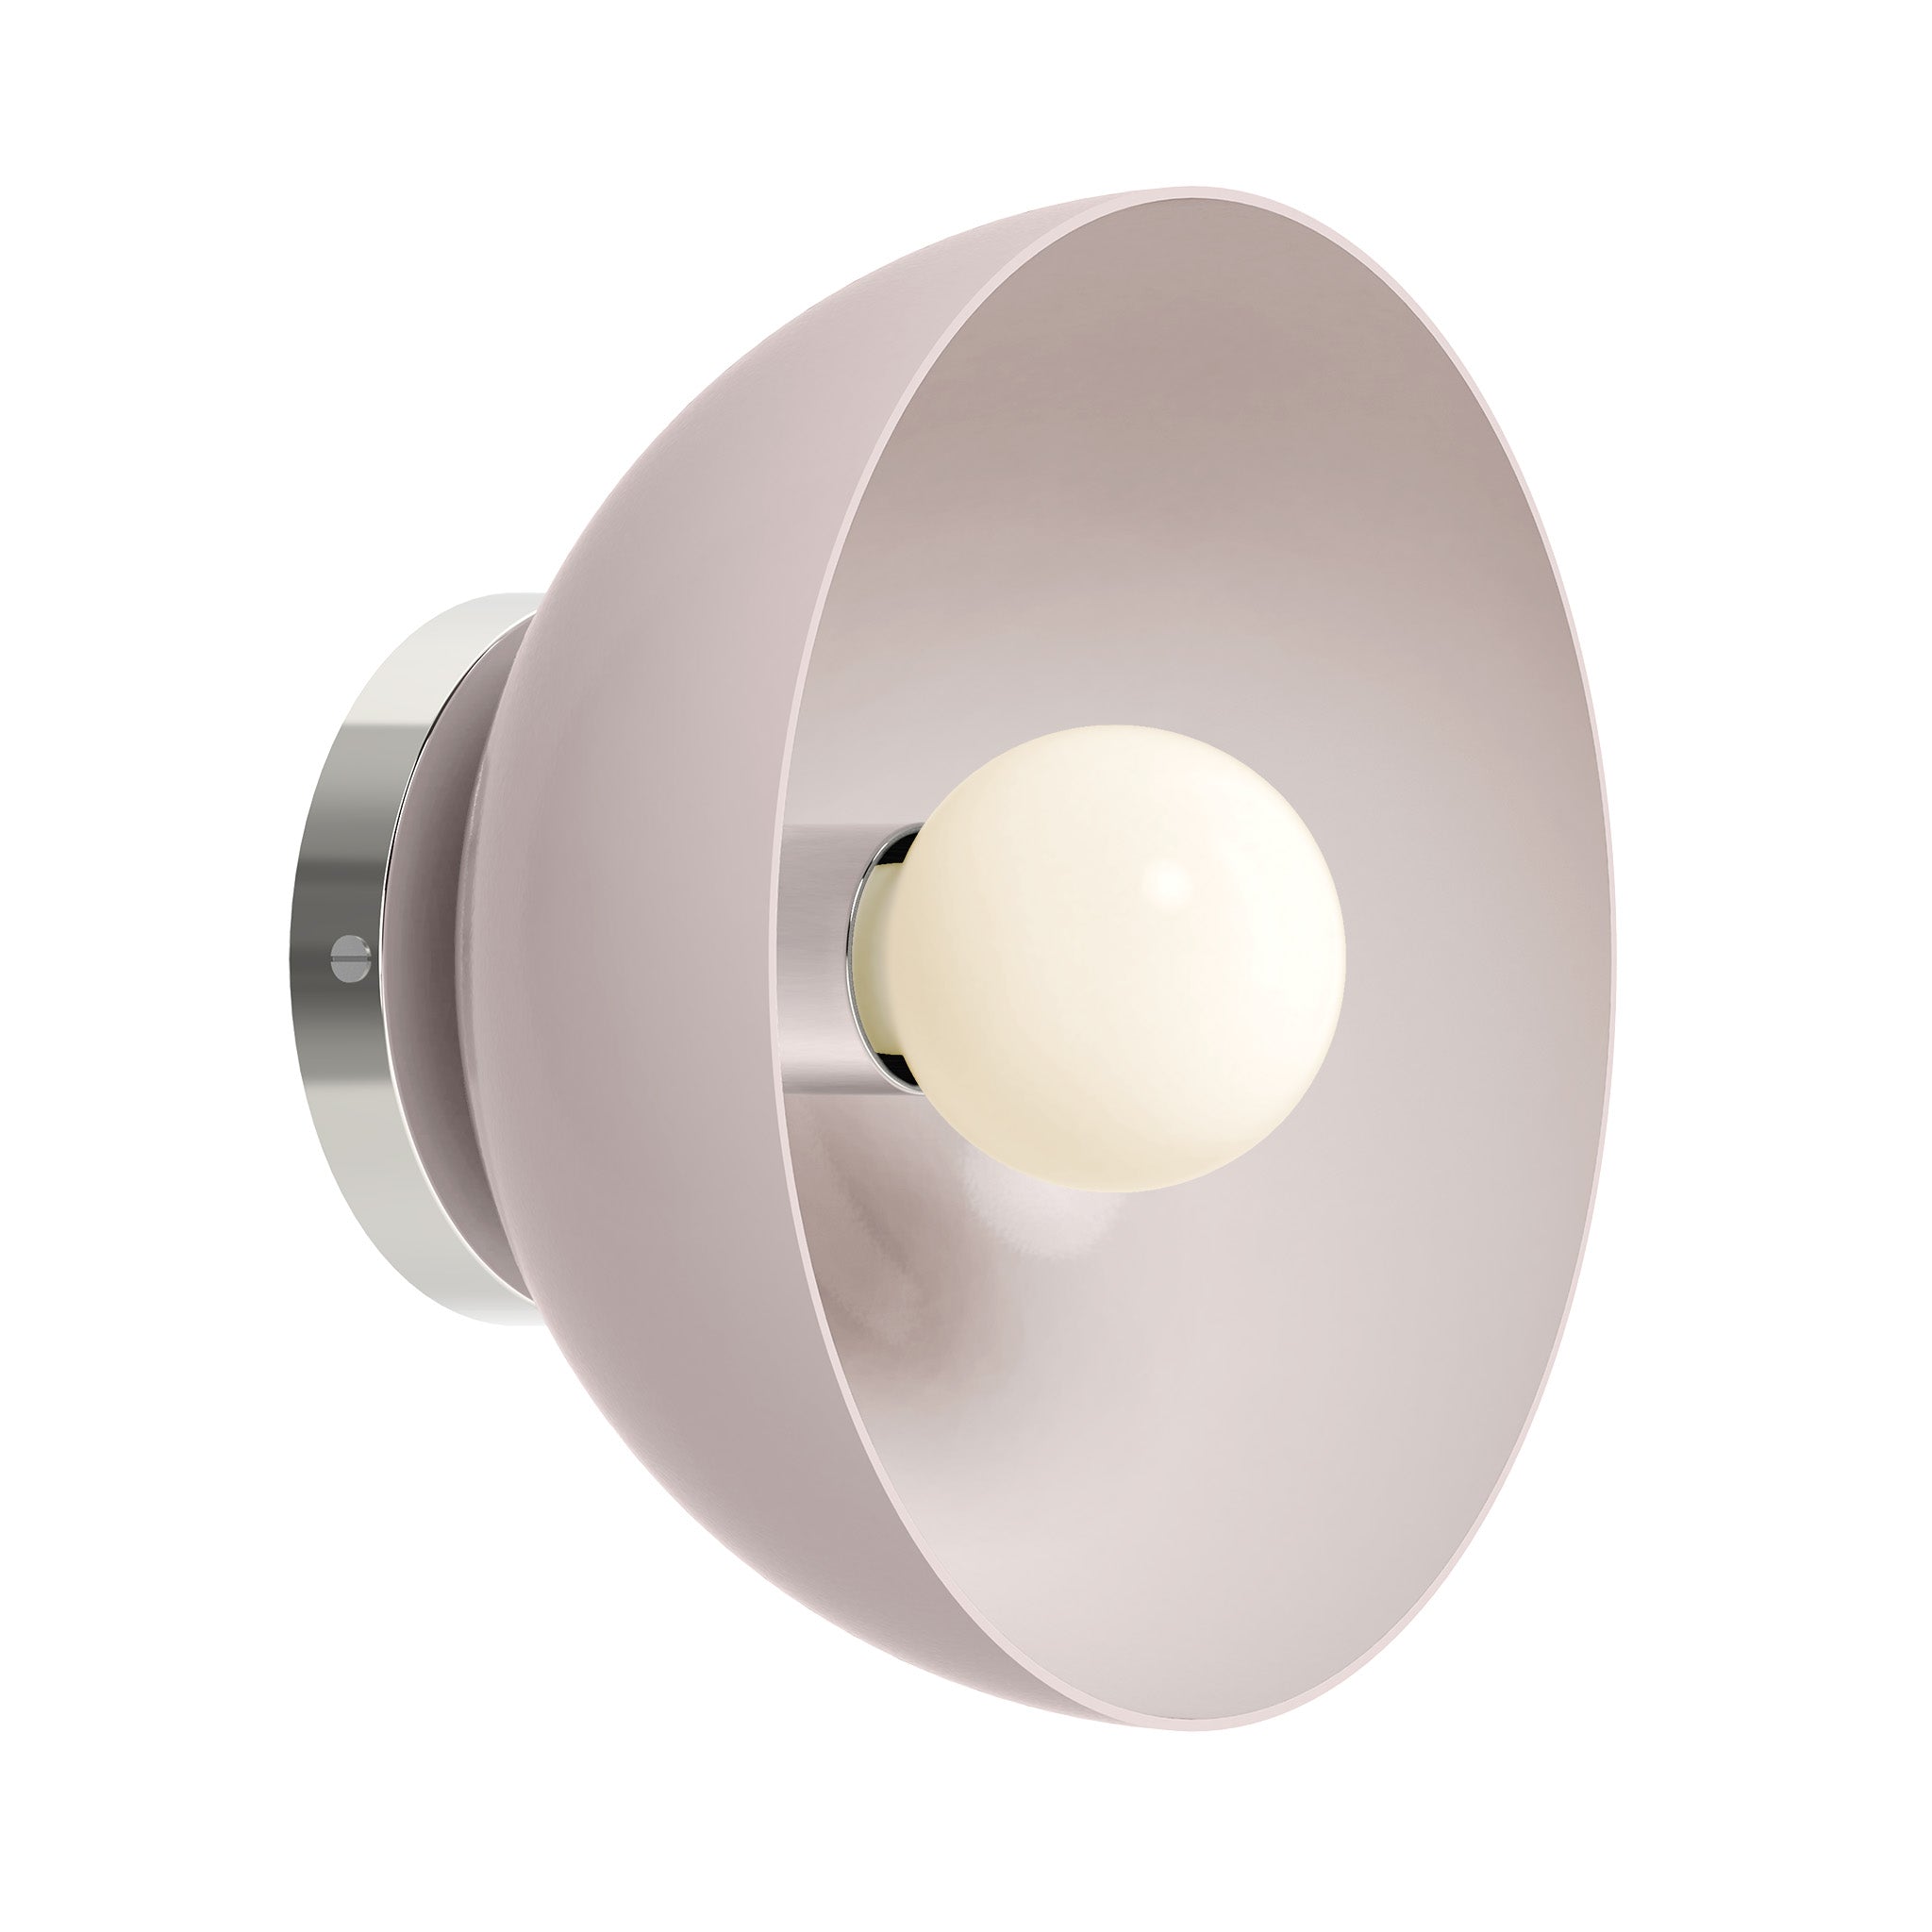 Nickel and barely color hemi dome sconce 10" Dutton Brown lighting